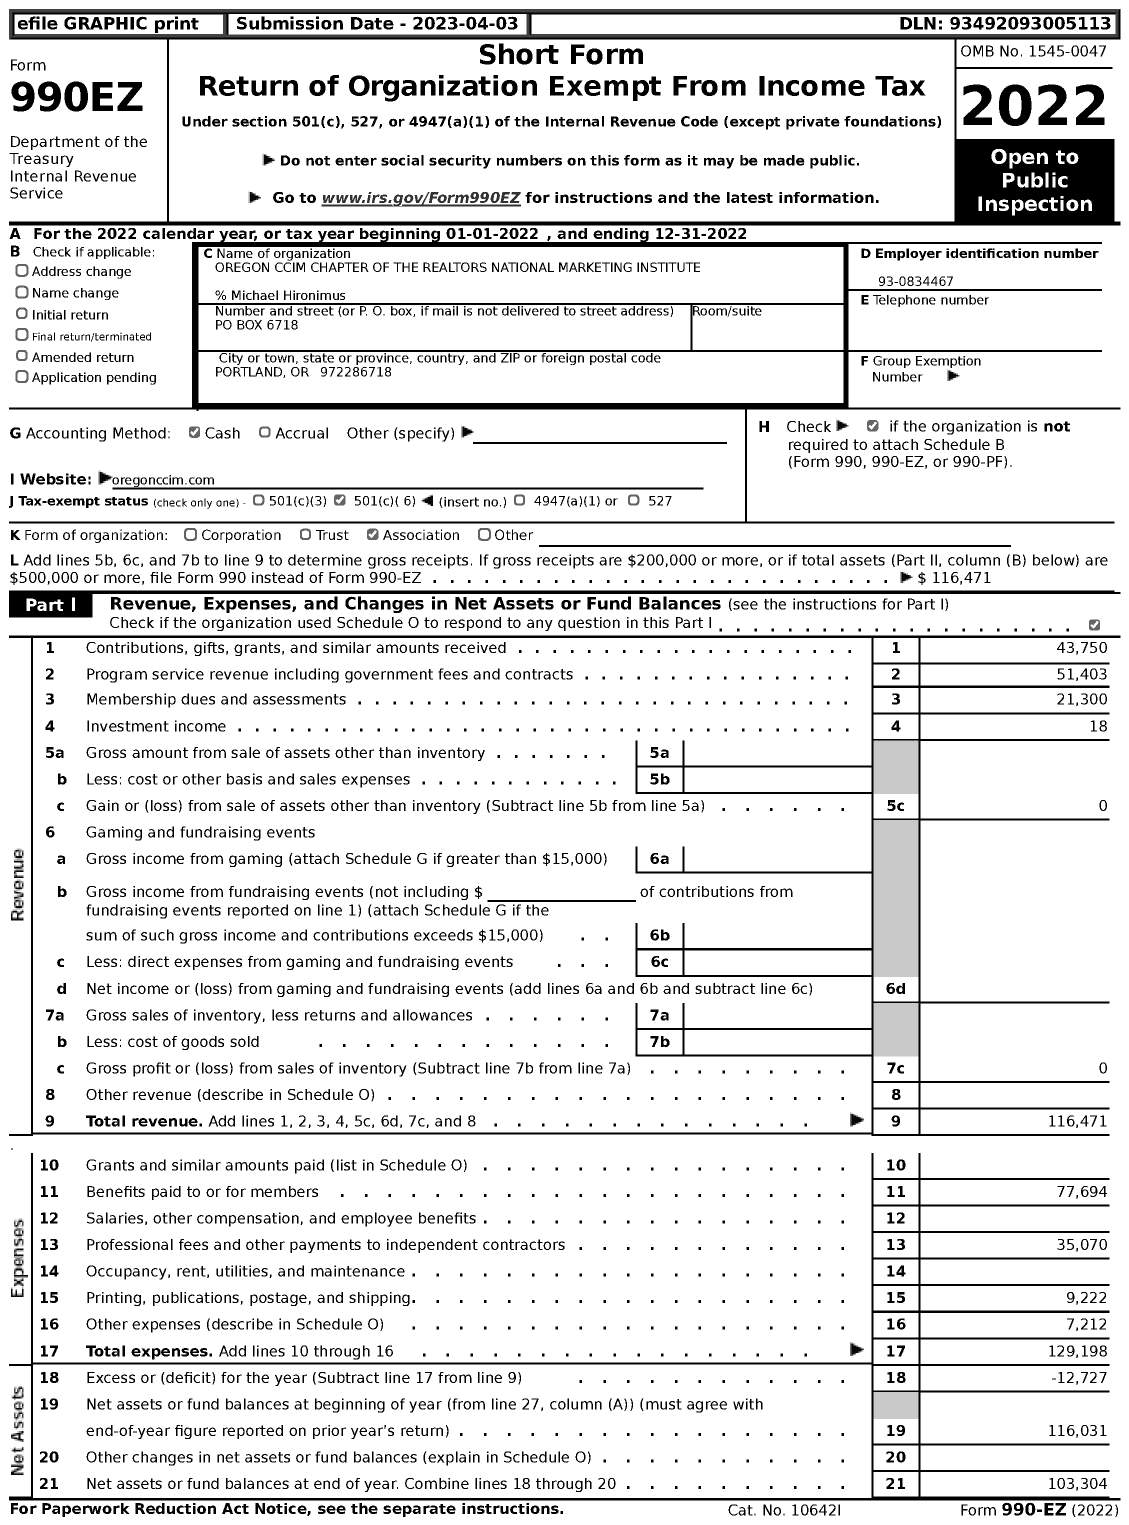 Image of first page of 2022 Form 990EZ for Oregon Ccim Chapter of the Realtors National Marketing Institute